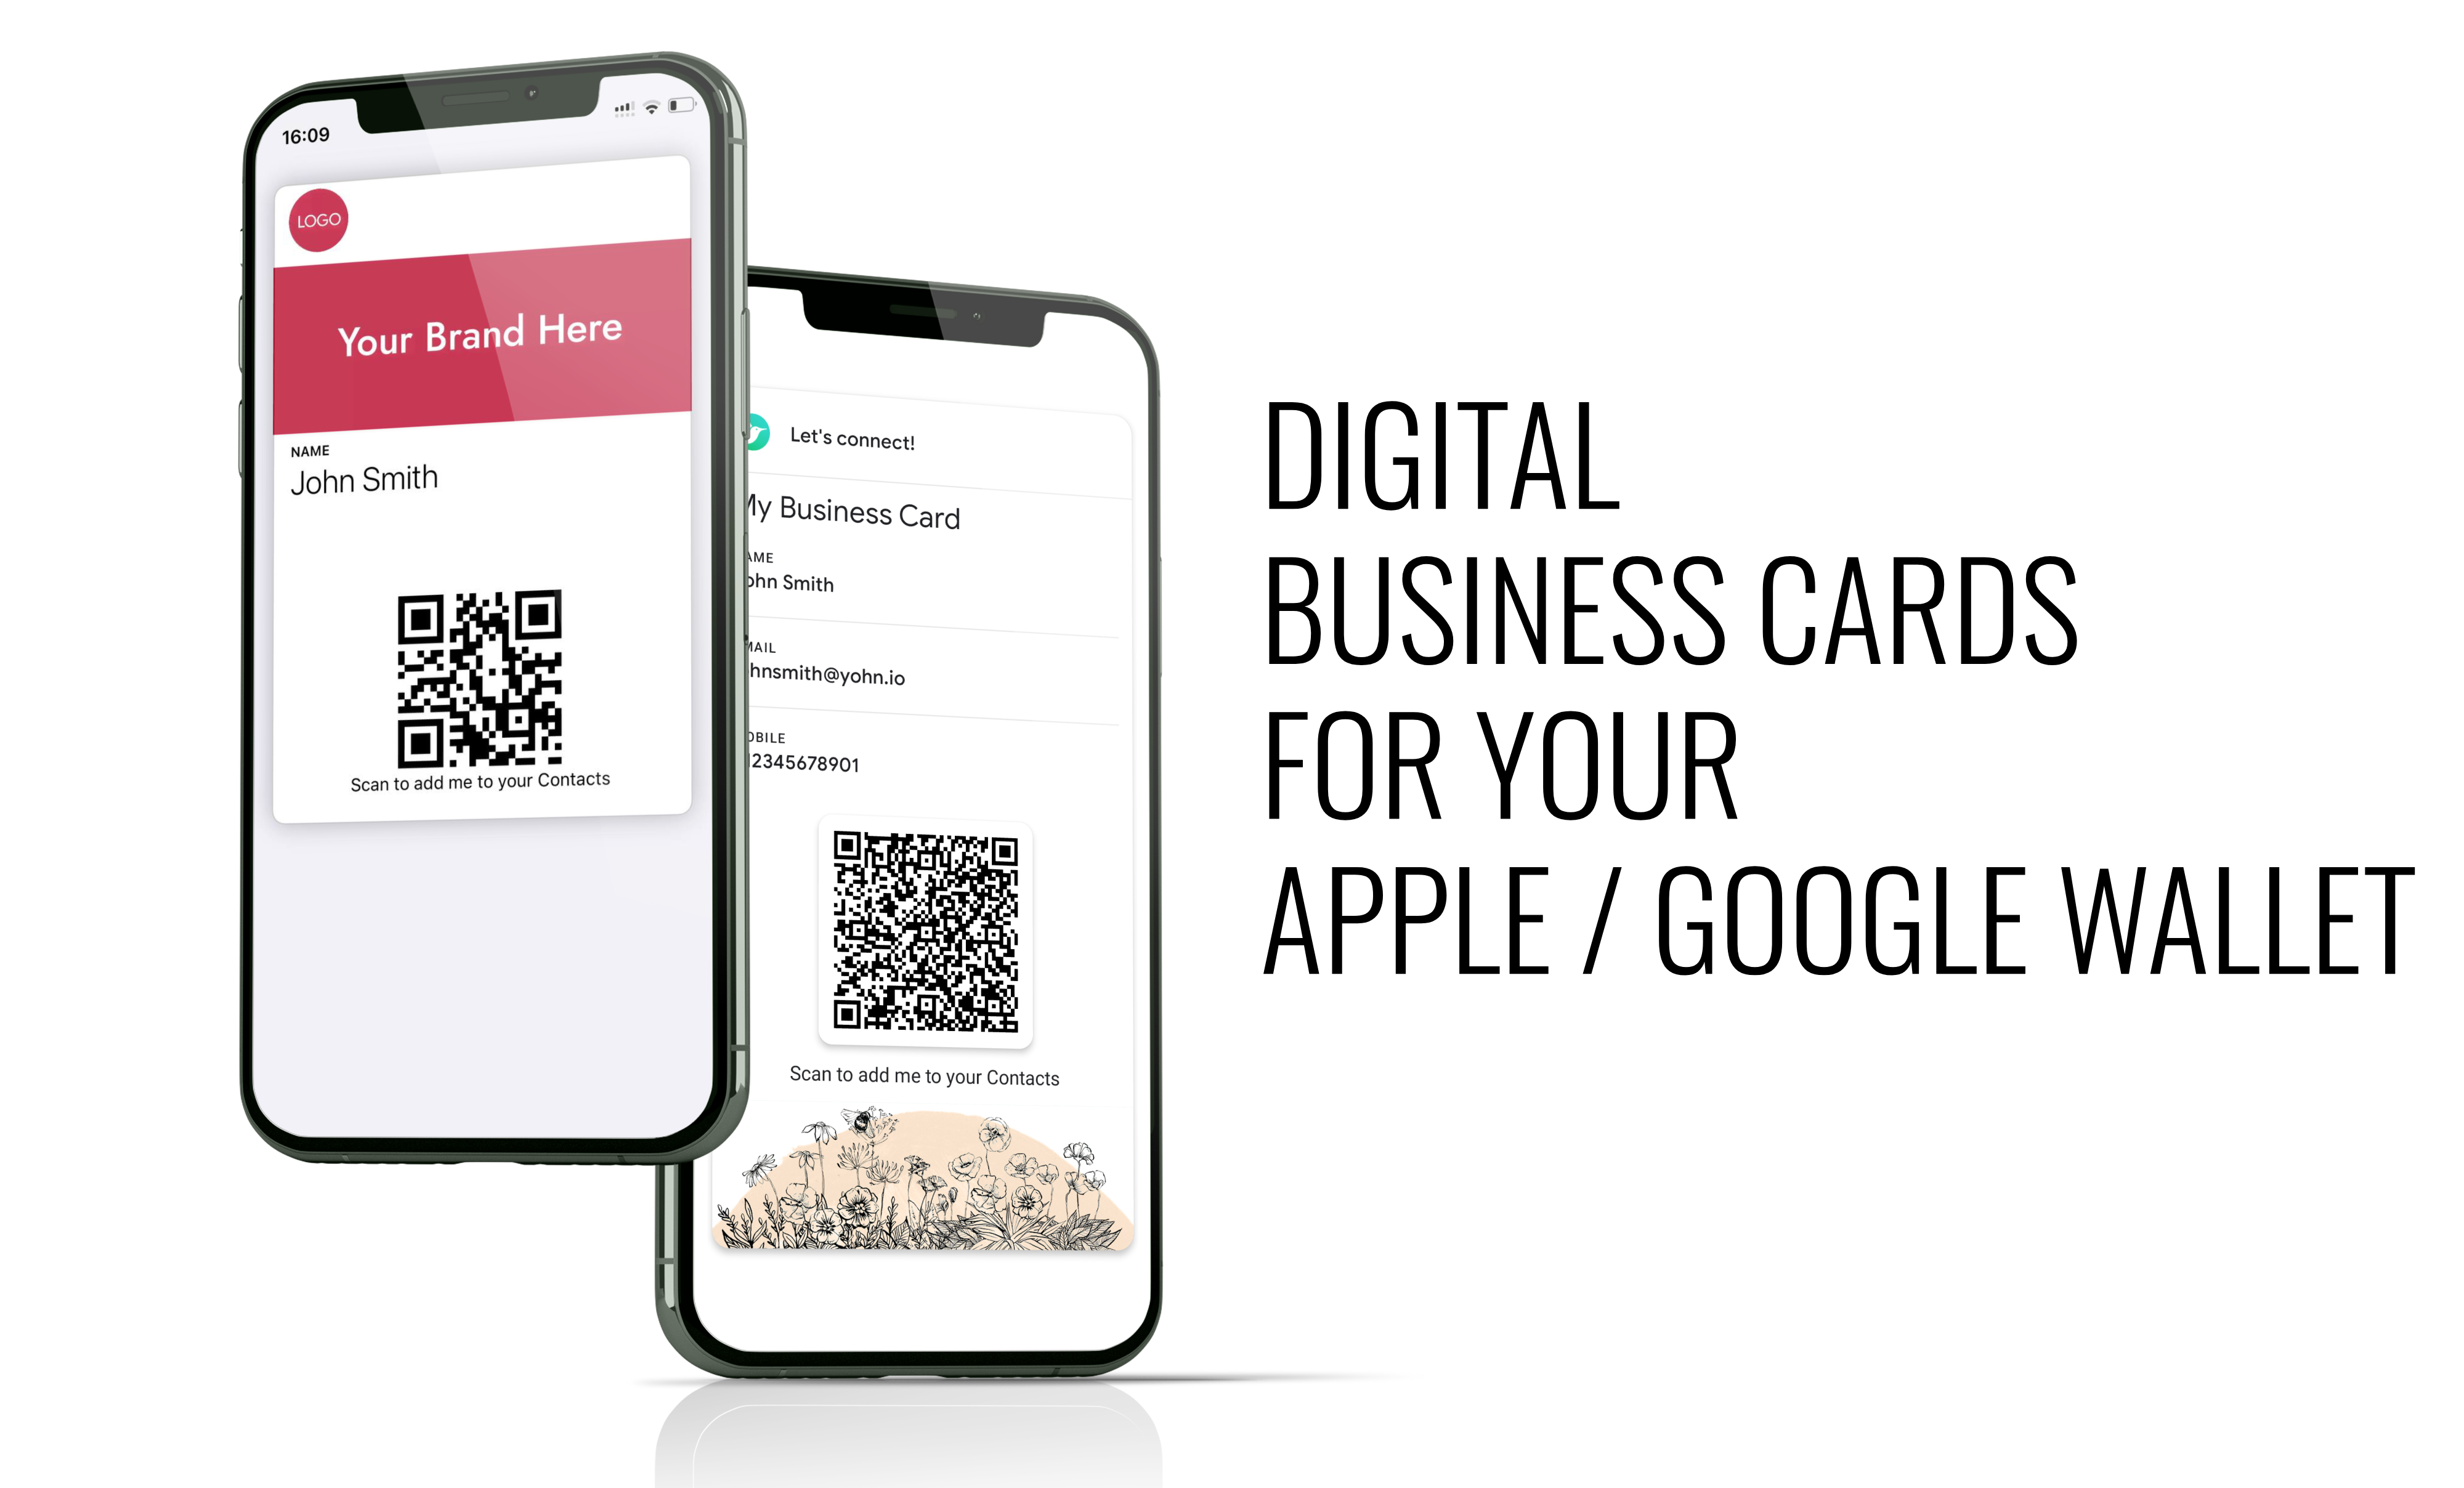 Create digital business cards or vCards - as simple QR codes, cards for Apple / Google Wallet or landing pages